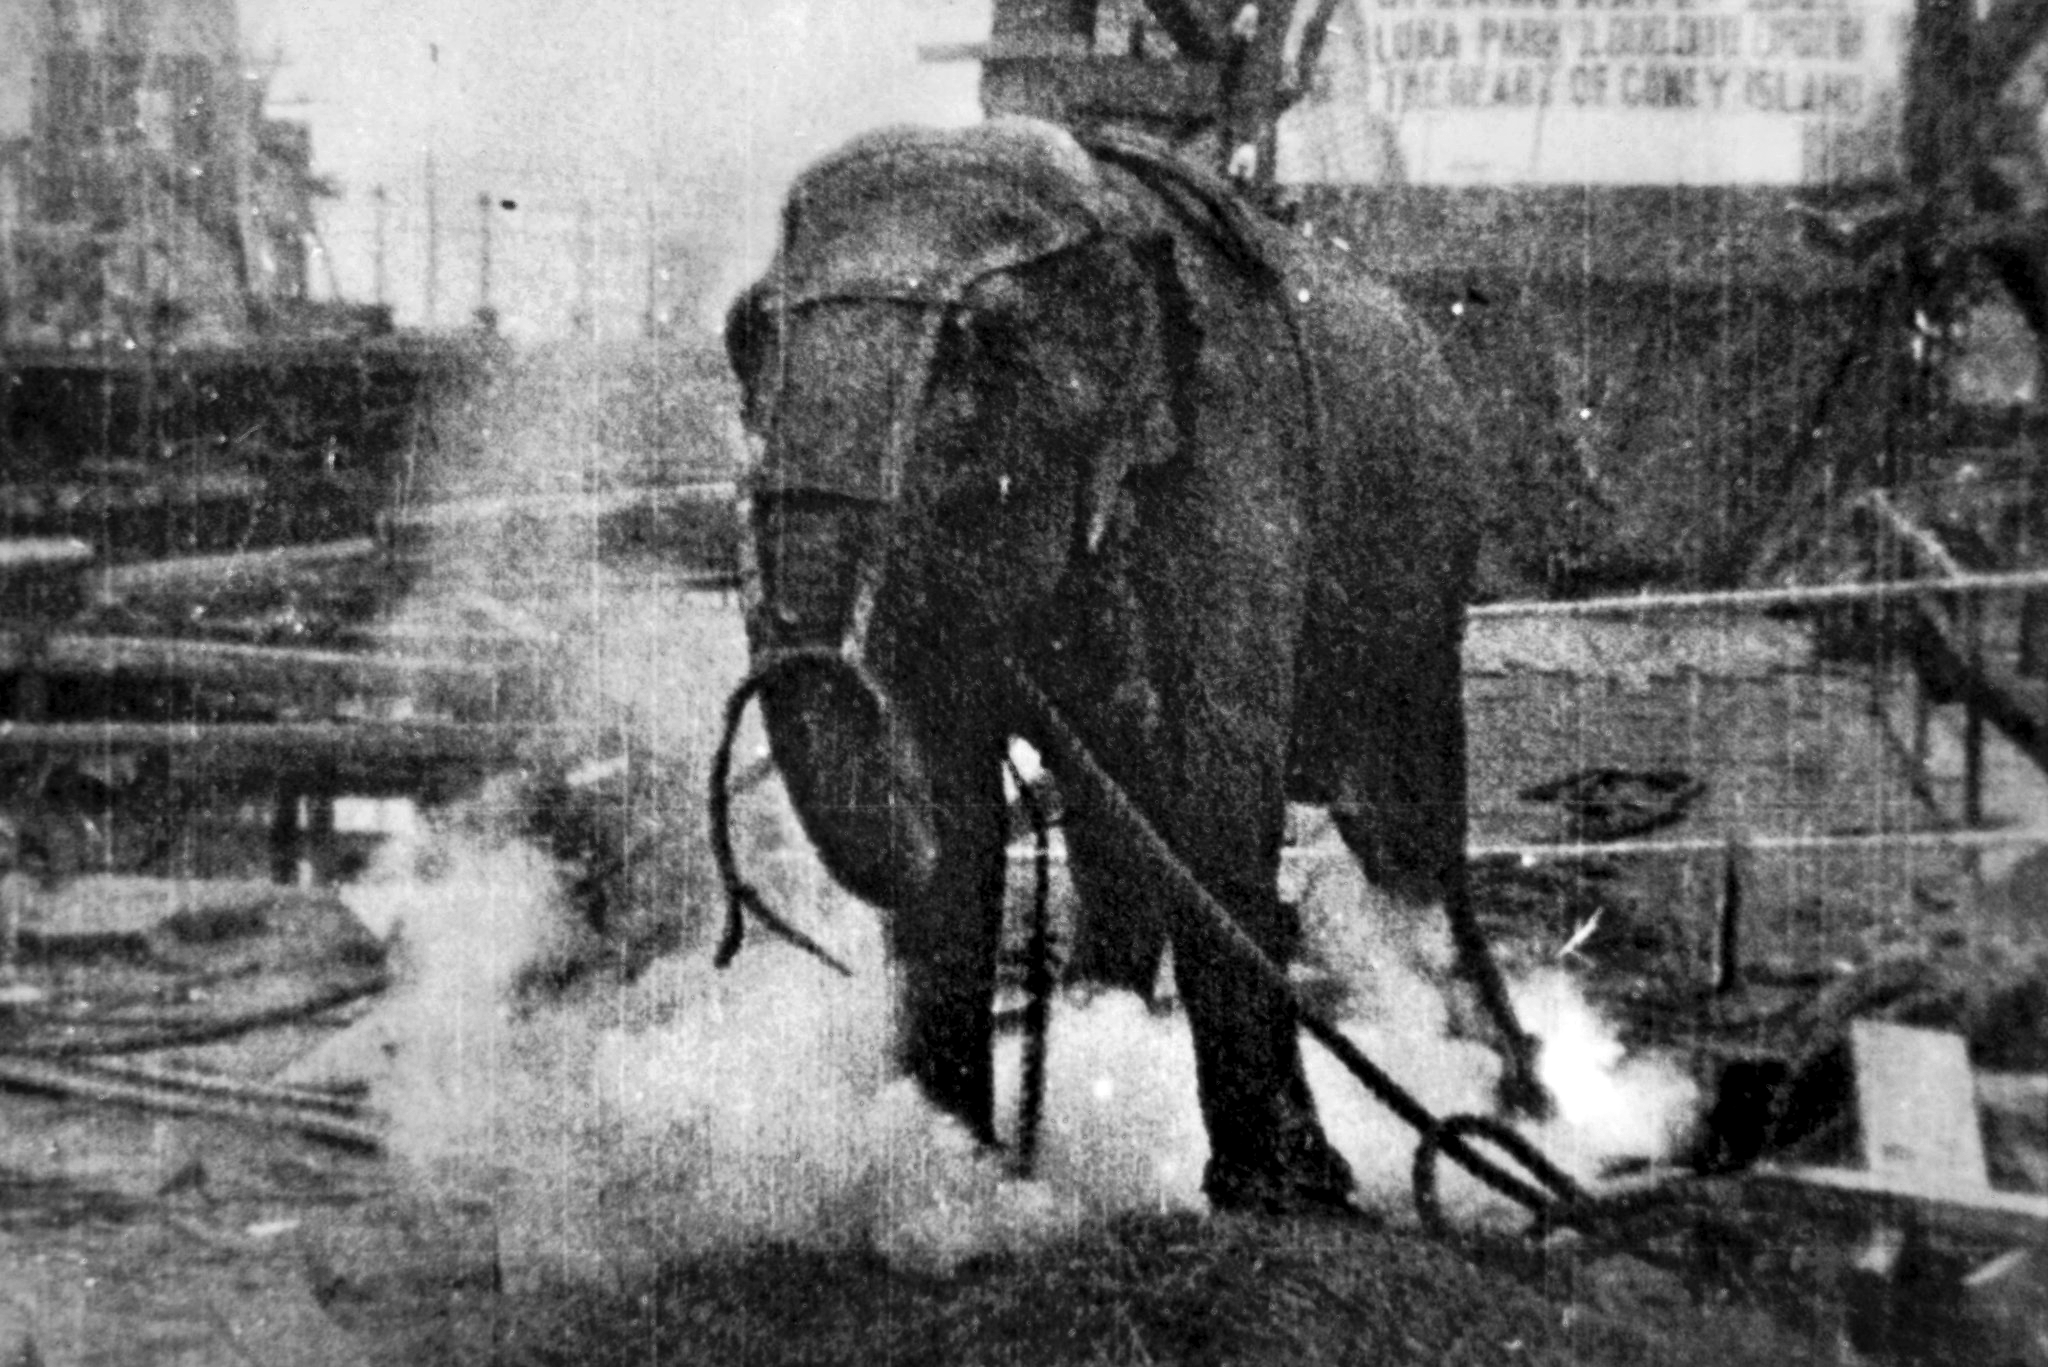 Wikimedia Commons / A frame from the 74 second short documentary film *Electrocuting an Elephant*, produced by Edwin S. Porter or Jacob Blair Smith for the Edison Manufacturing Company, 1903.